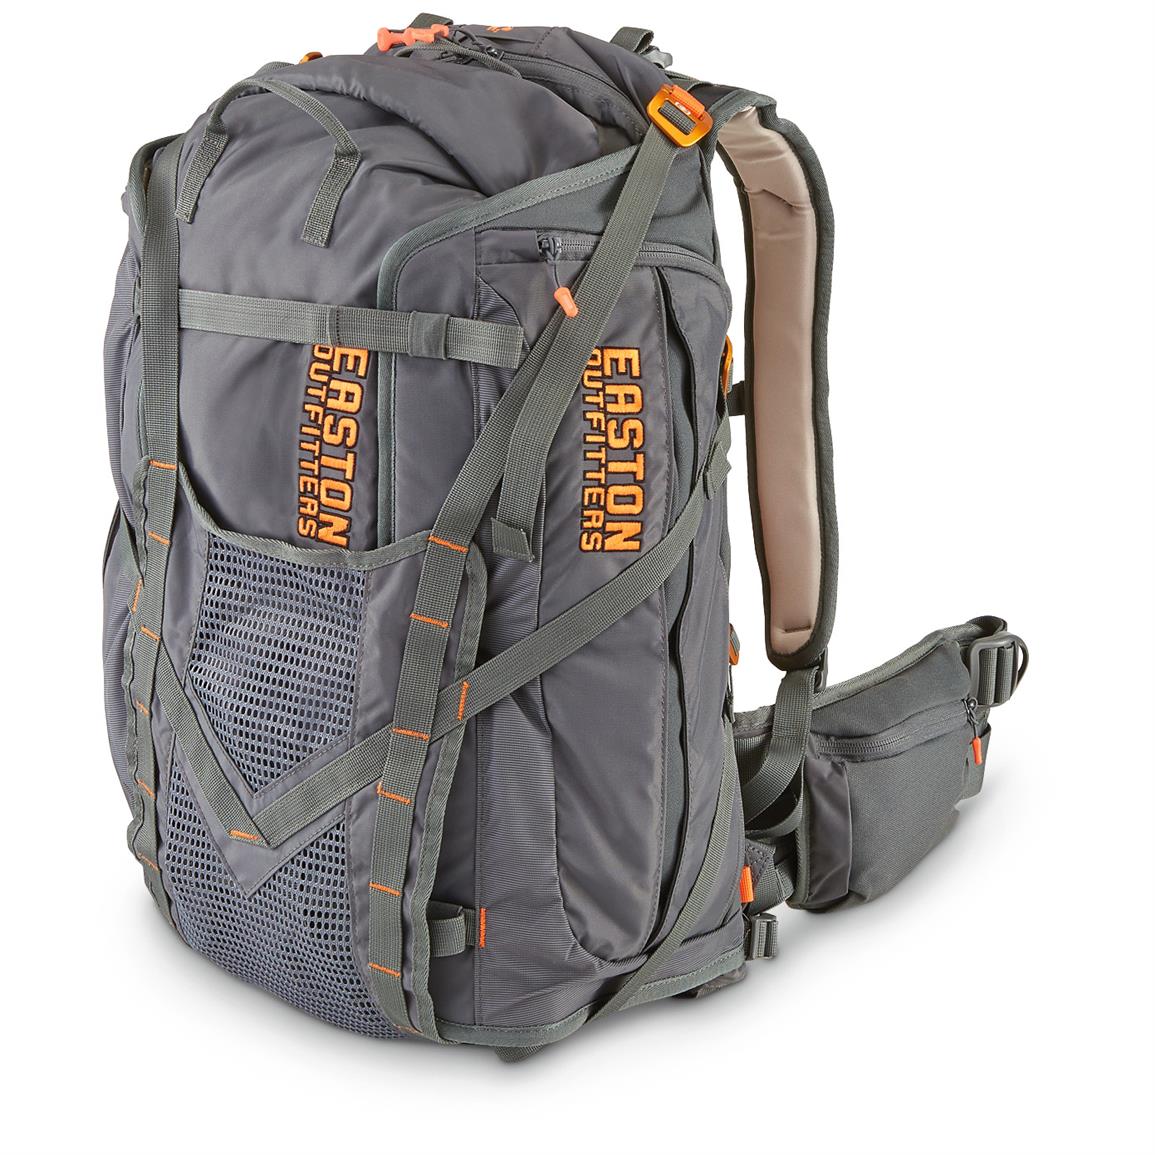 Easton Outfitter Fullbore 3600 Hunting Backpack - 660808, Camping ...